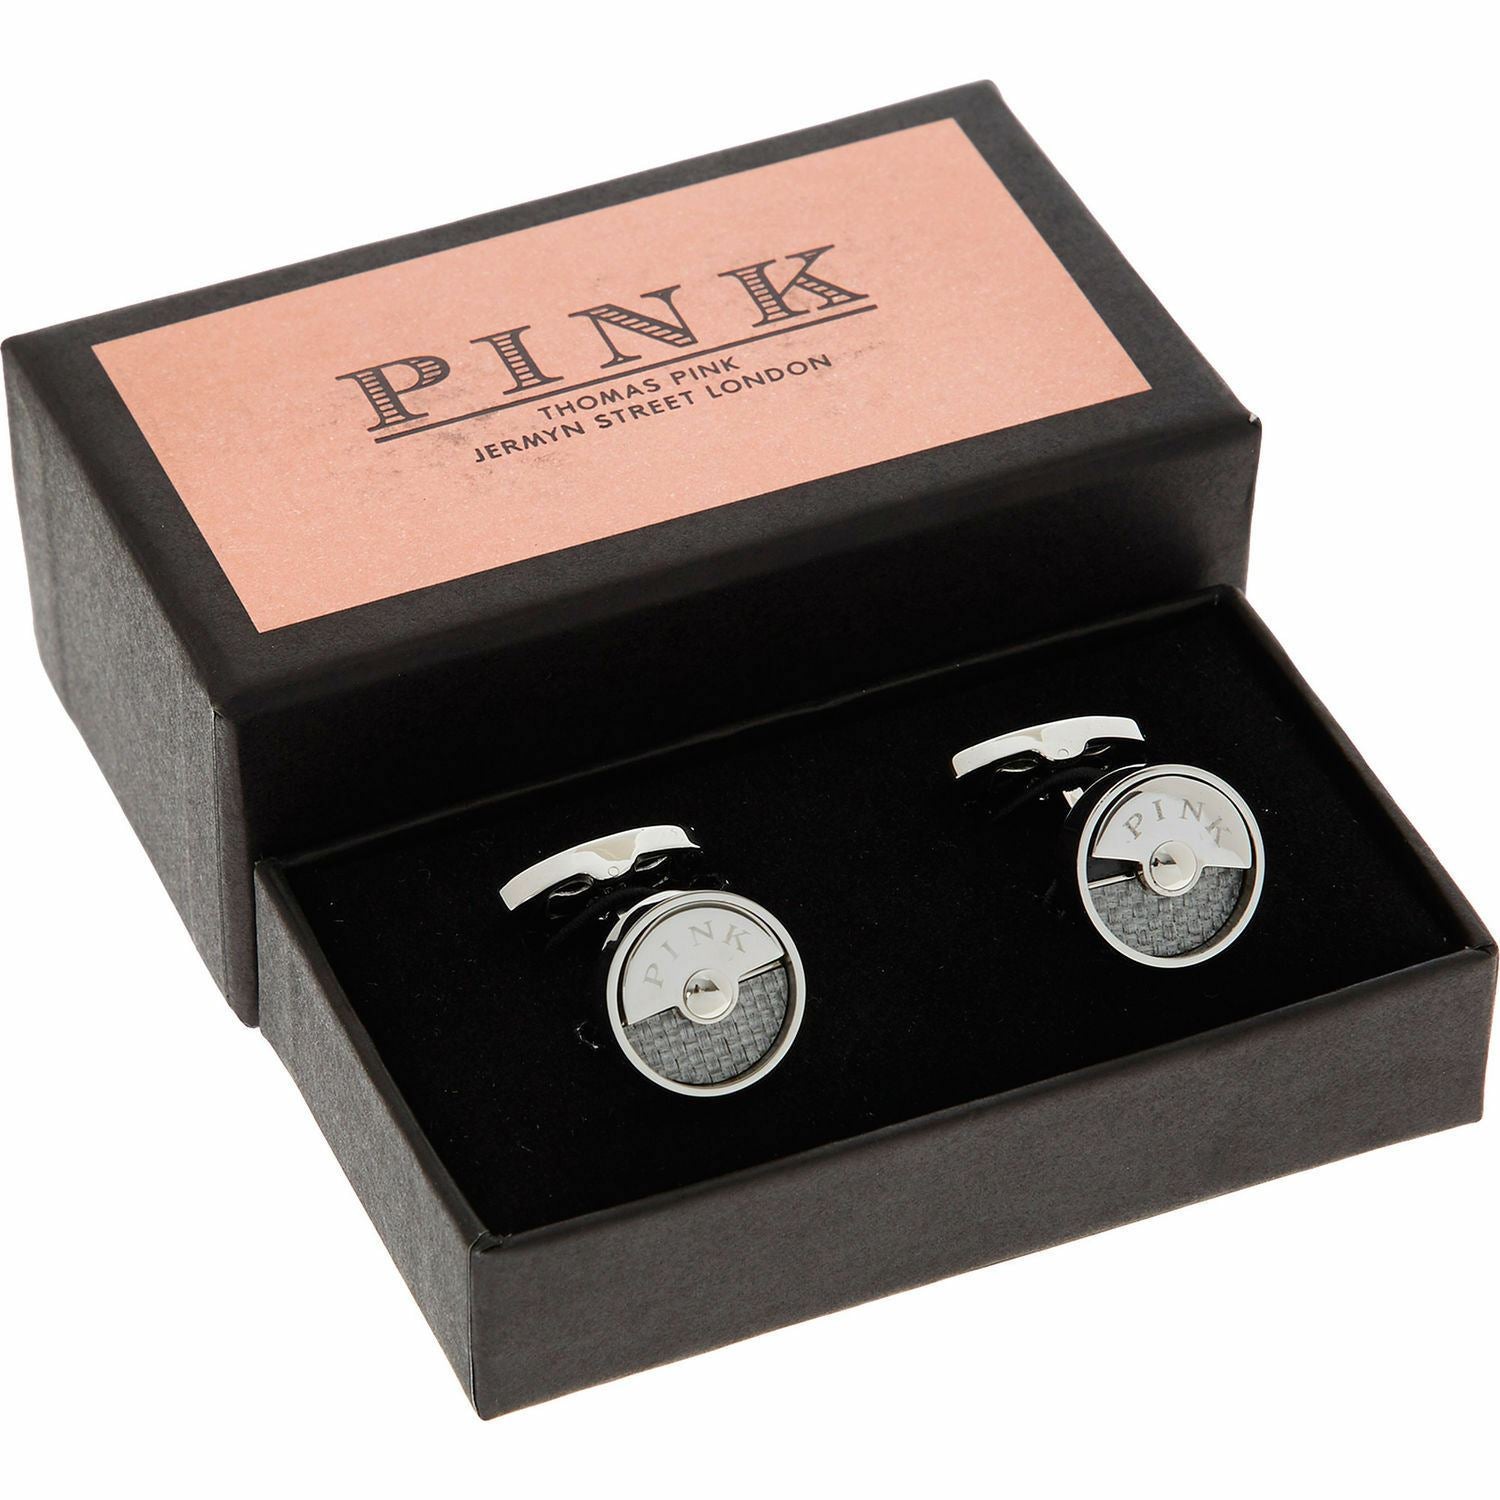 THOMAS PINK Men's Silver Tone Round Cufflinks, Gift Boxed